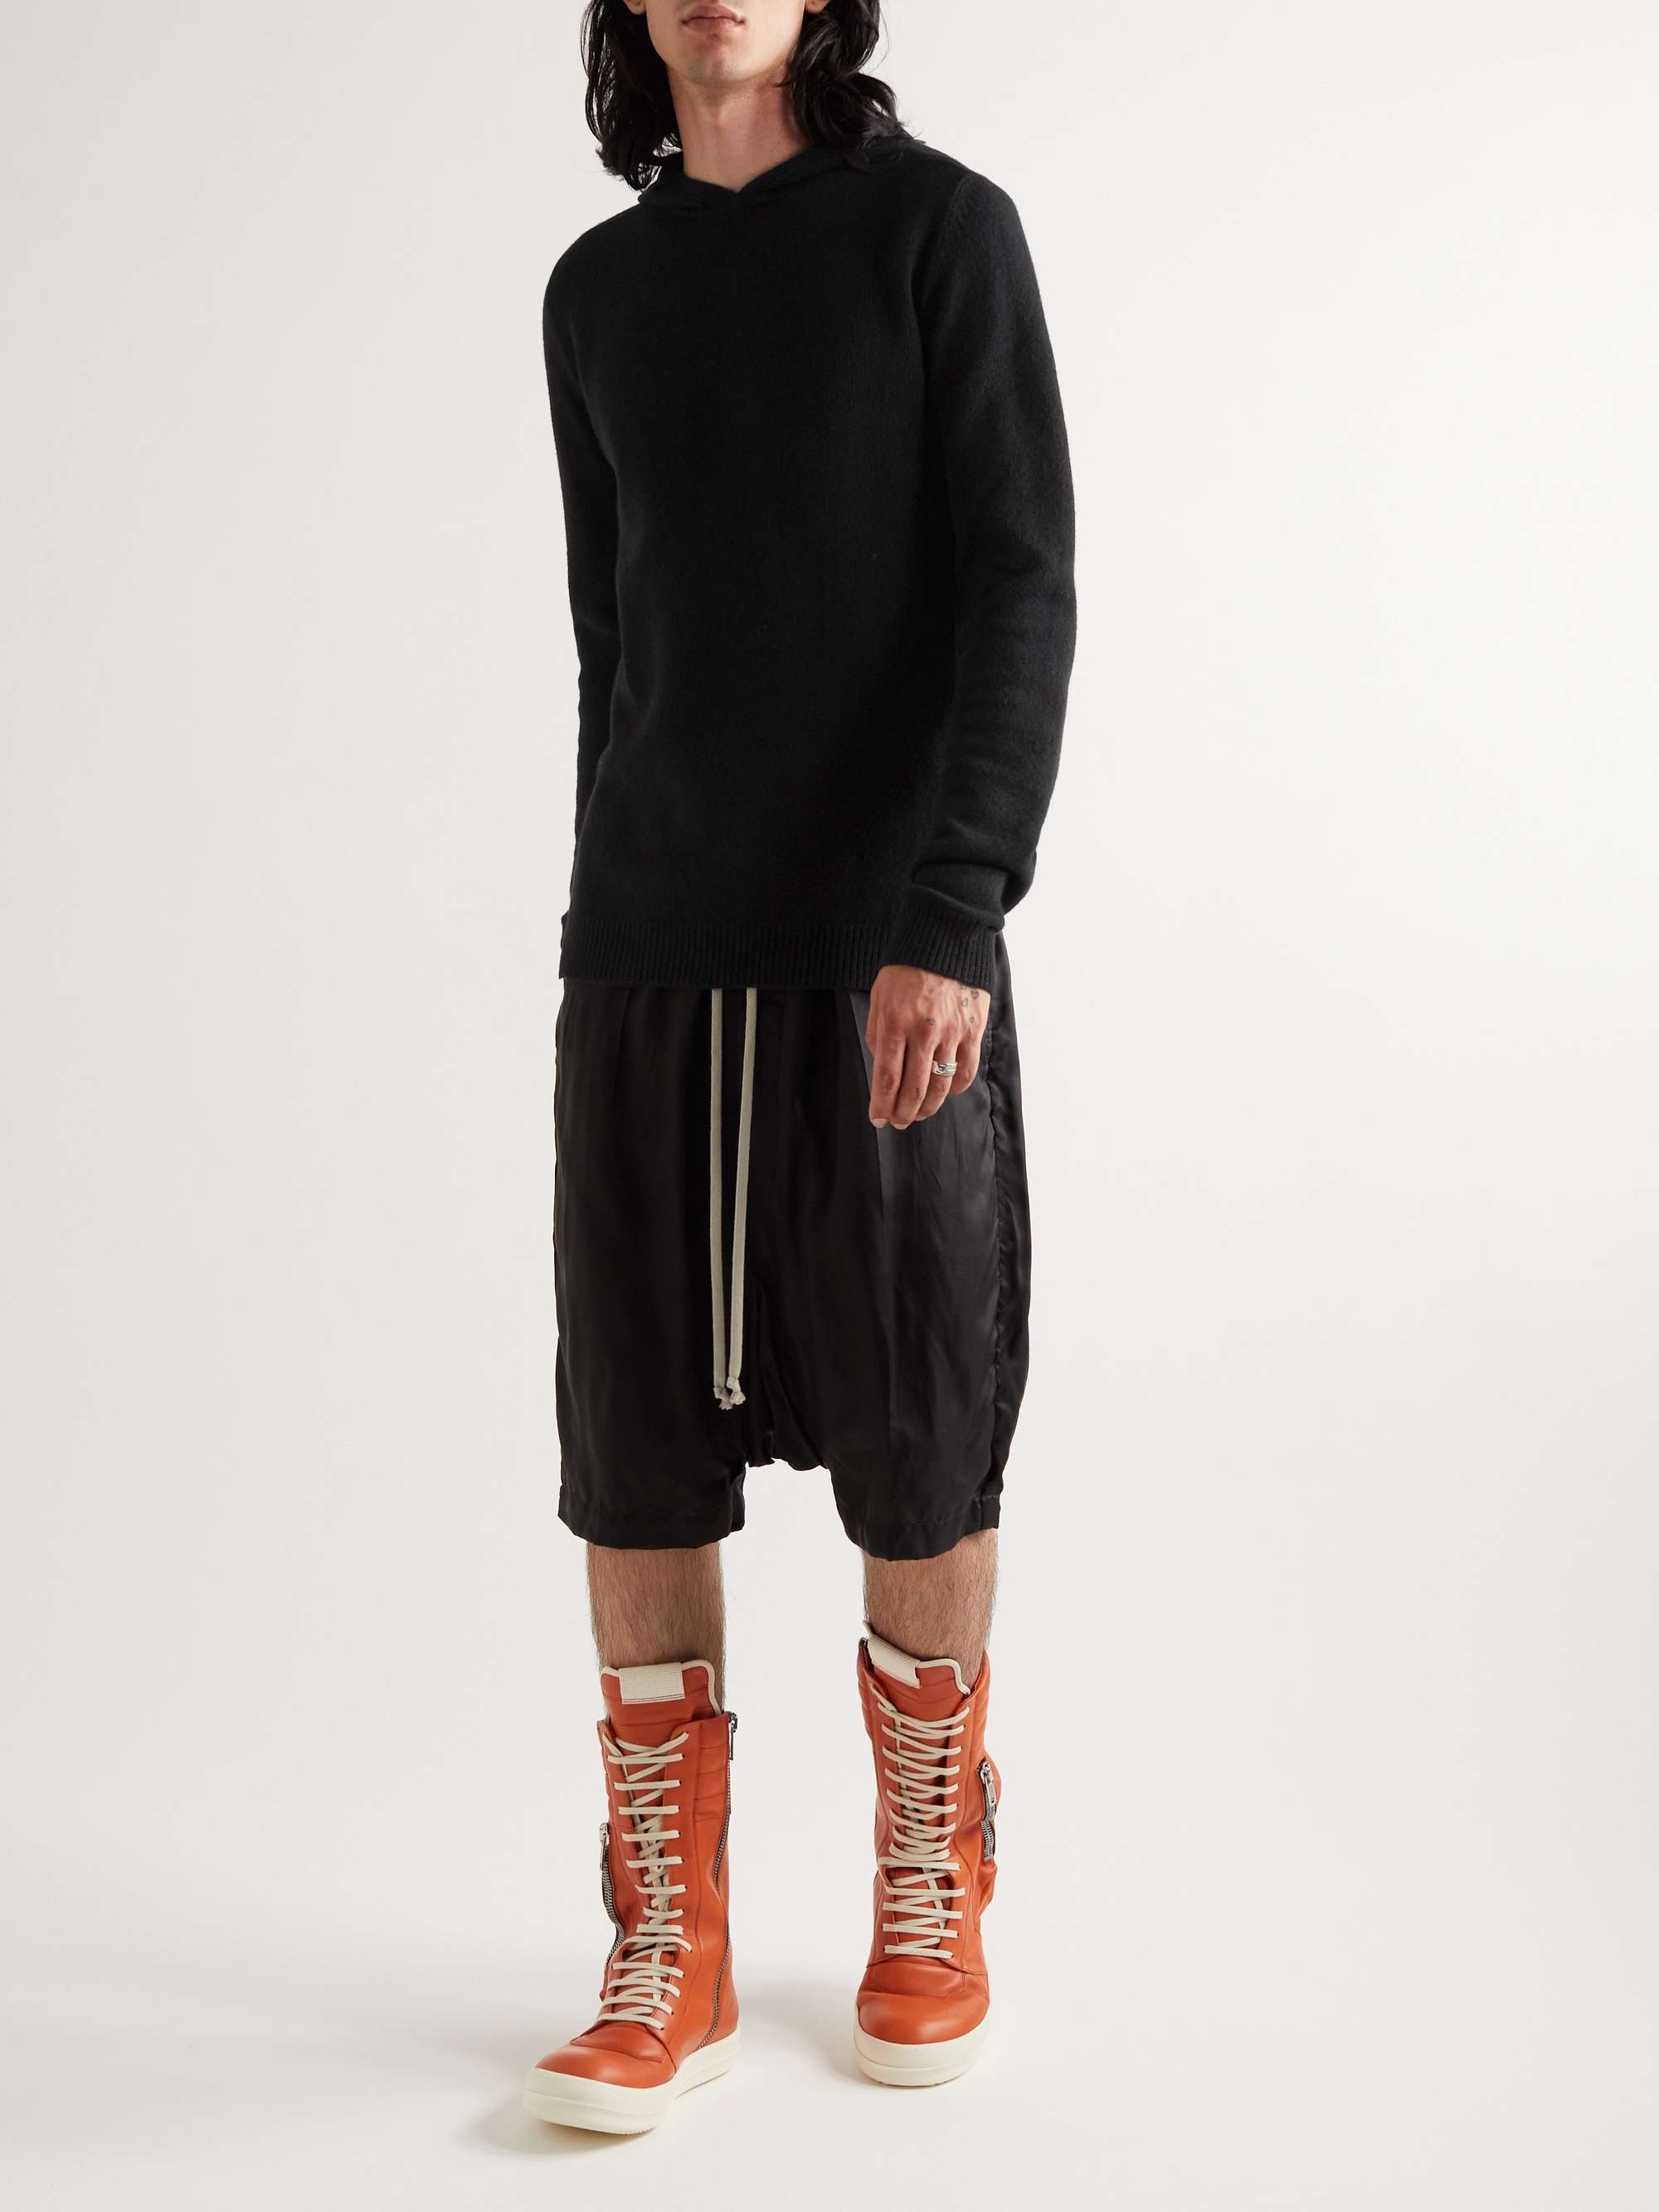 RICK OWENS Cashmere and Wool-Blend Hoodie